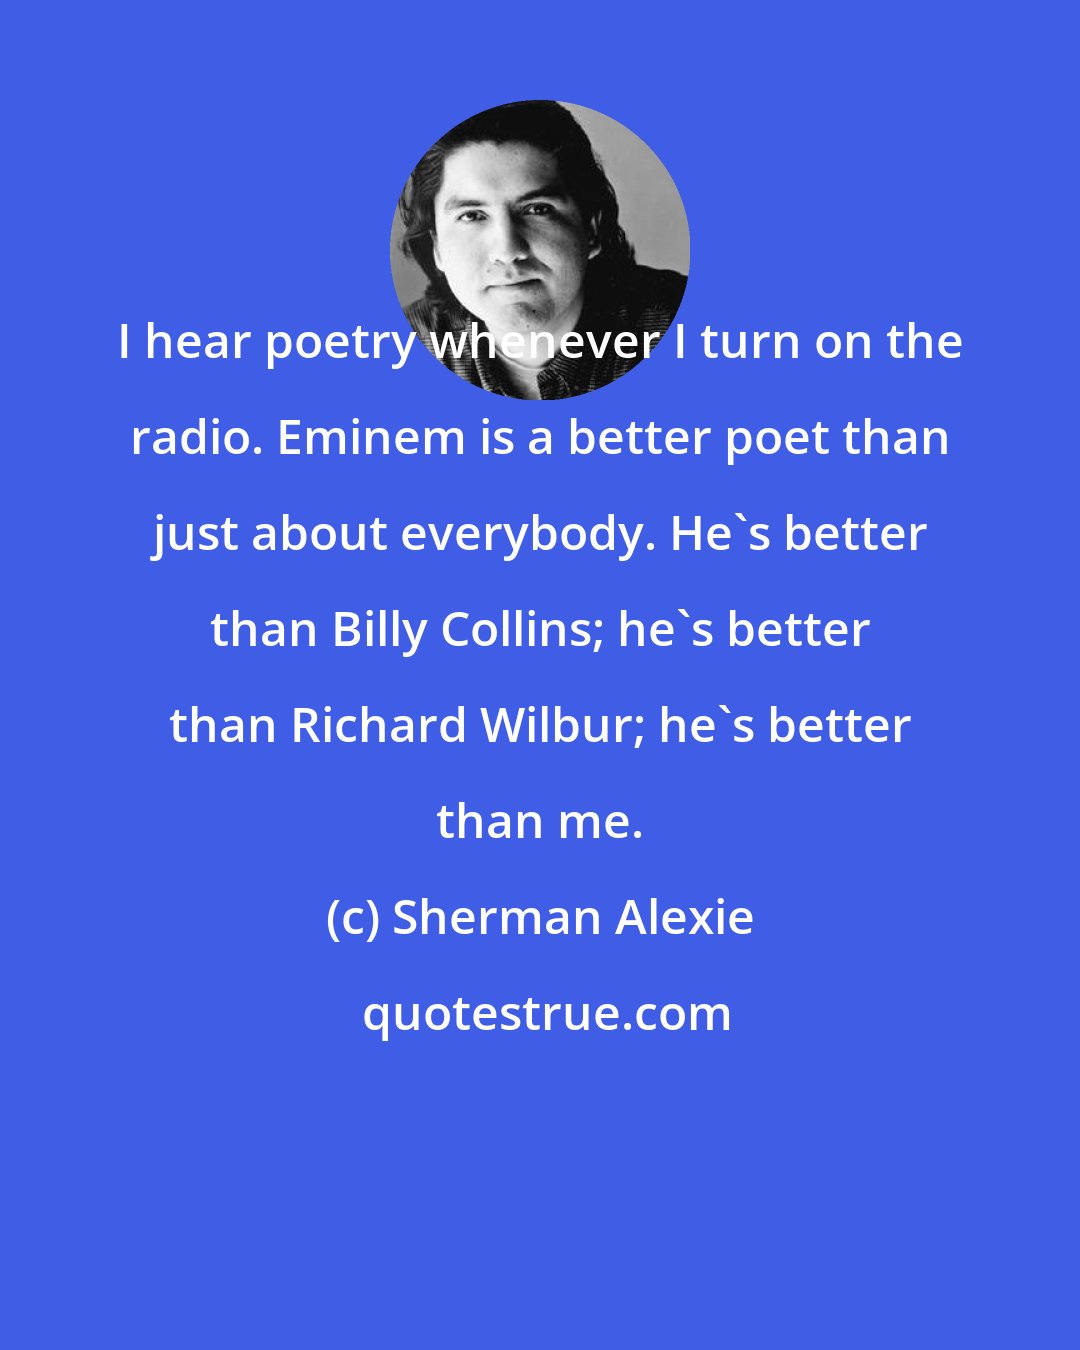 Sherman Alexie: I hear poetry whenever I turn on the radio. Eminem is a better poet than just about everybody. He's better than Billy Collins; he's better than Richard Wilbur; he's better than me.